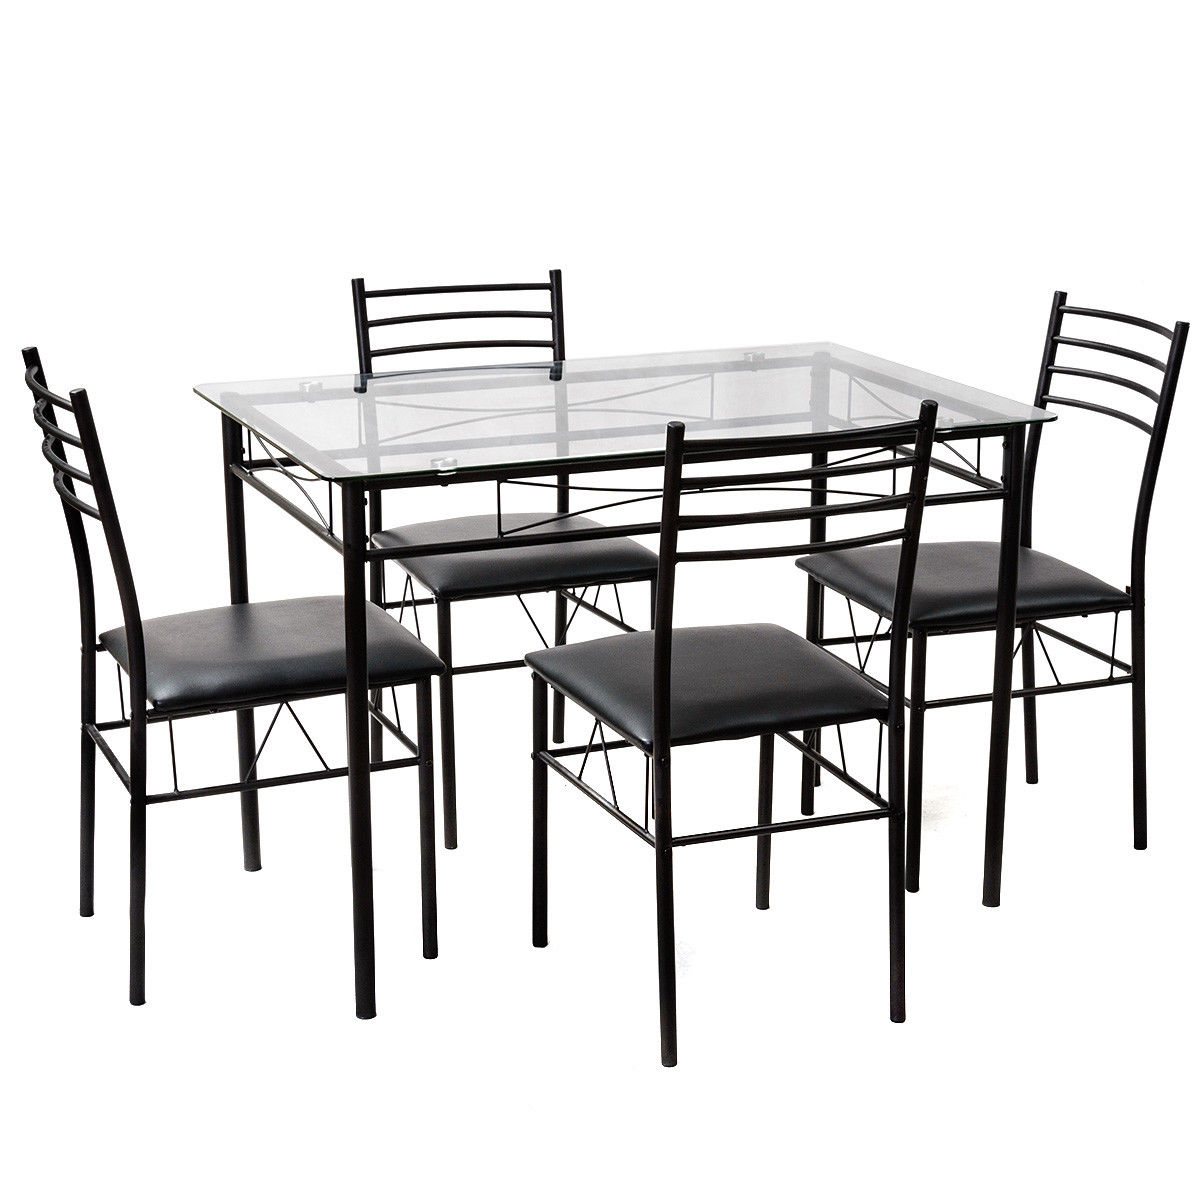 Gymax 5 Piece Dining Set Glass Top Table & 4 Upholstered Chairs Kitchen Room Furniture - image 3 of 7